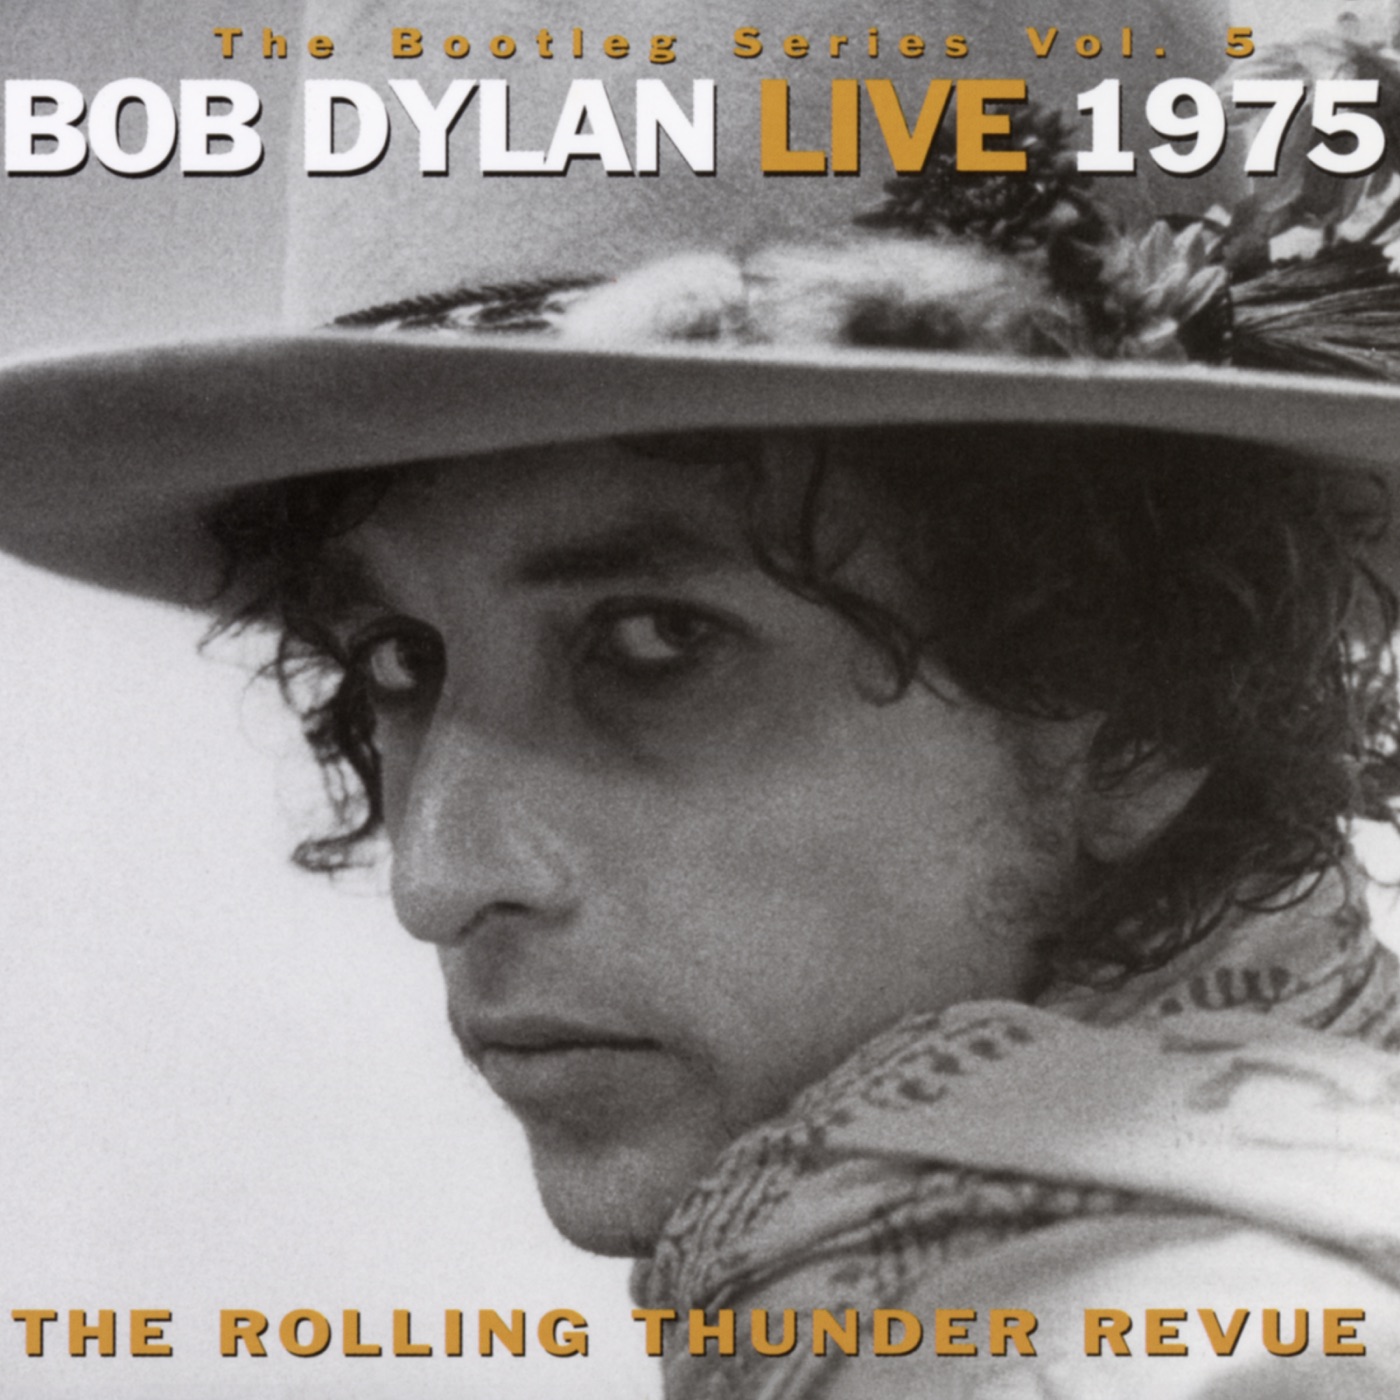 The Bootleg Series, Vol. 5 - Bob Dylan Live 1975: The Rolling Thunder Revue by Bob Dylan